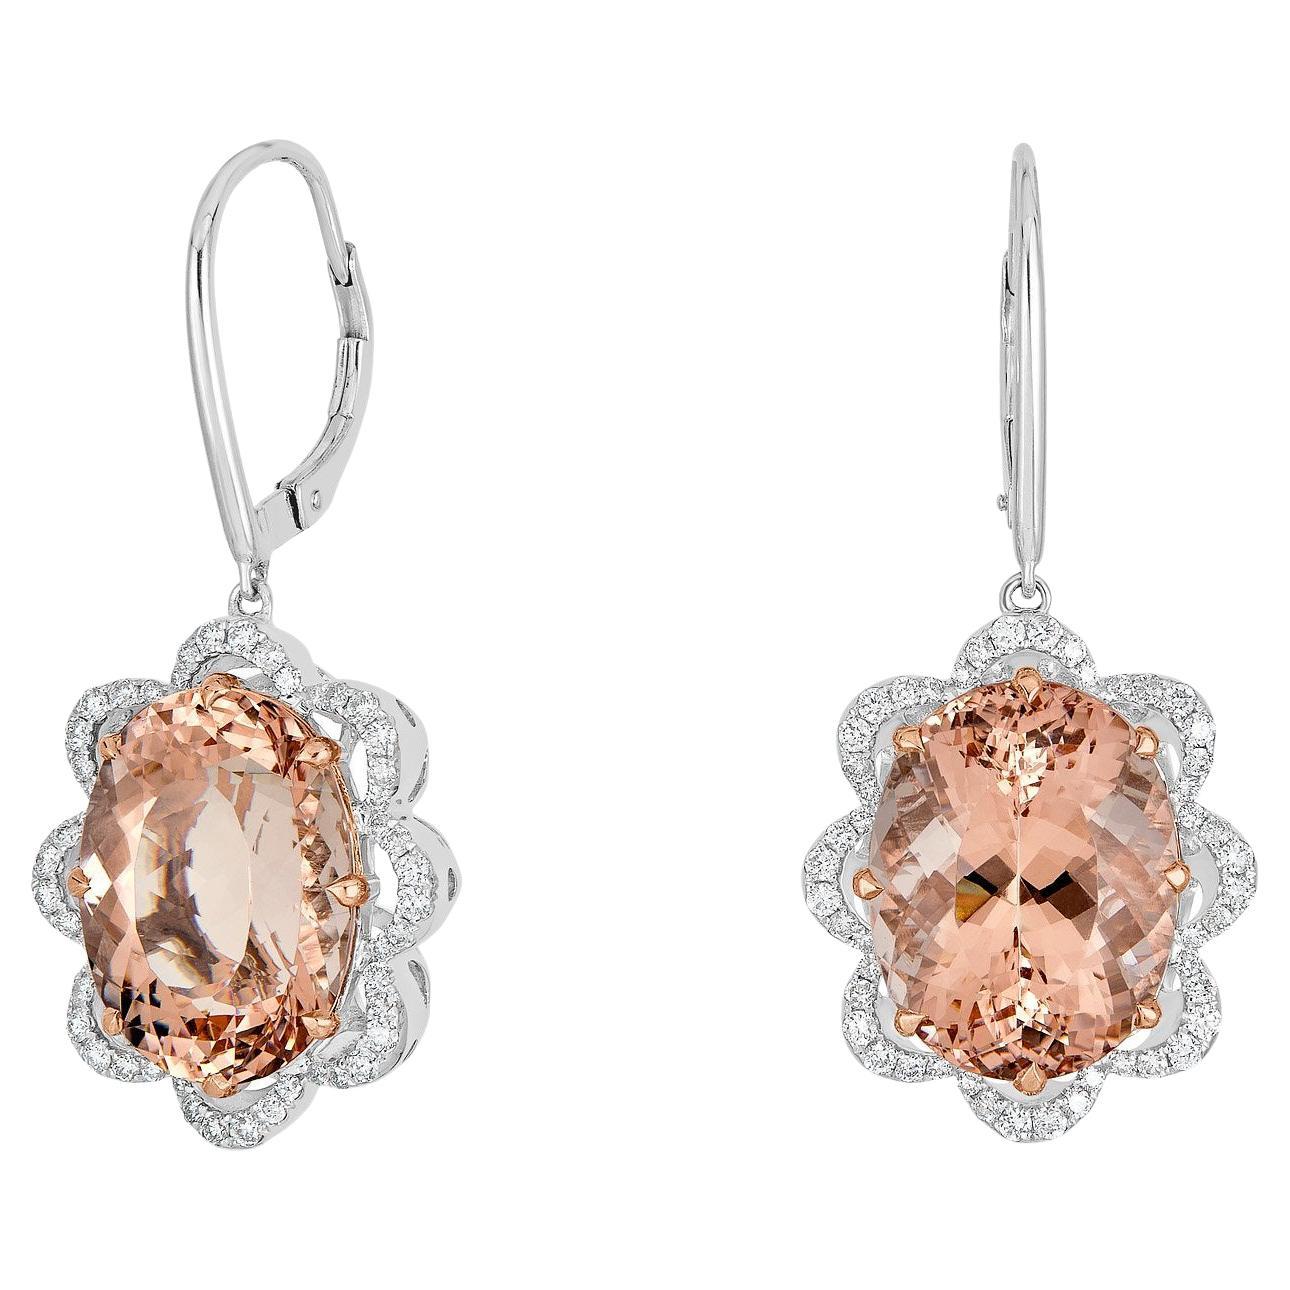 GEM BLEU 23.28ct Morganite Earrings with 0.81tct Diamonds in 14K Two Tone Gold For Sale